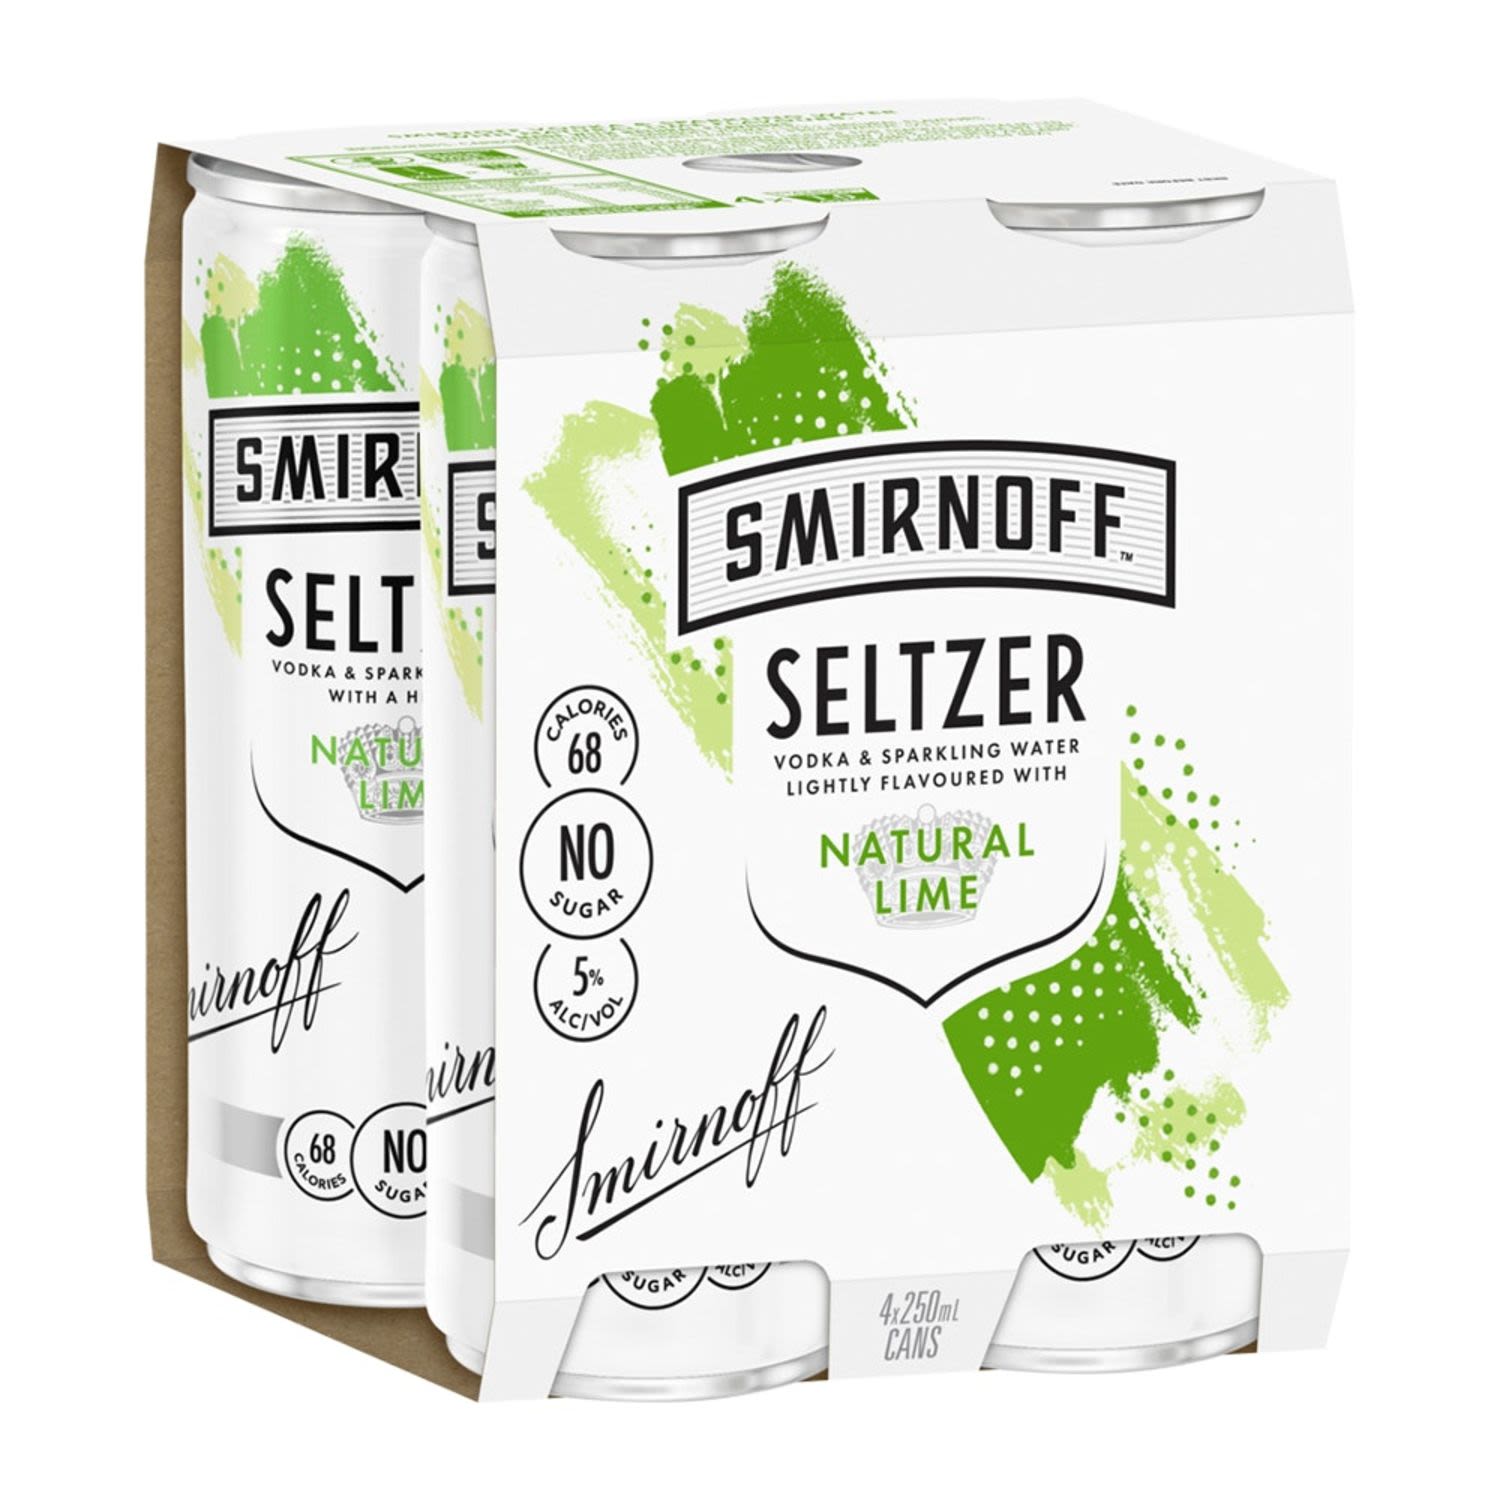 The perfect blend of Smirnoff vodka and lightly flavoured sparkling water. A light and zesty lime aroma, fresh and clean taste of lime on the palate with a fresh after taste.<br /> <br />Alcohol Volume: 5.00%<br /><br />Pack Format: 4 Pack<br /><br />Standard Drinks: 1</br /><br />Pack Type: Can<br />